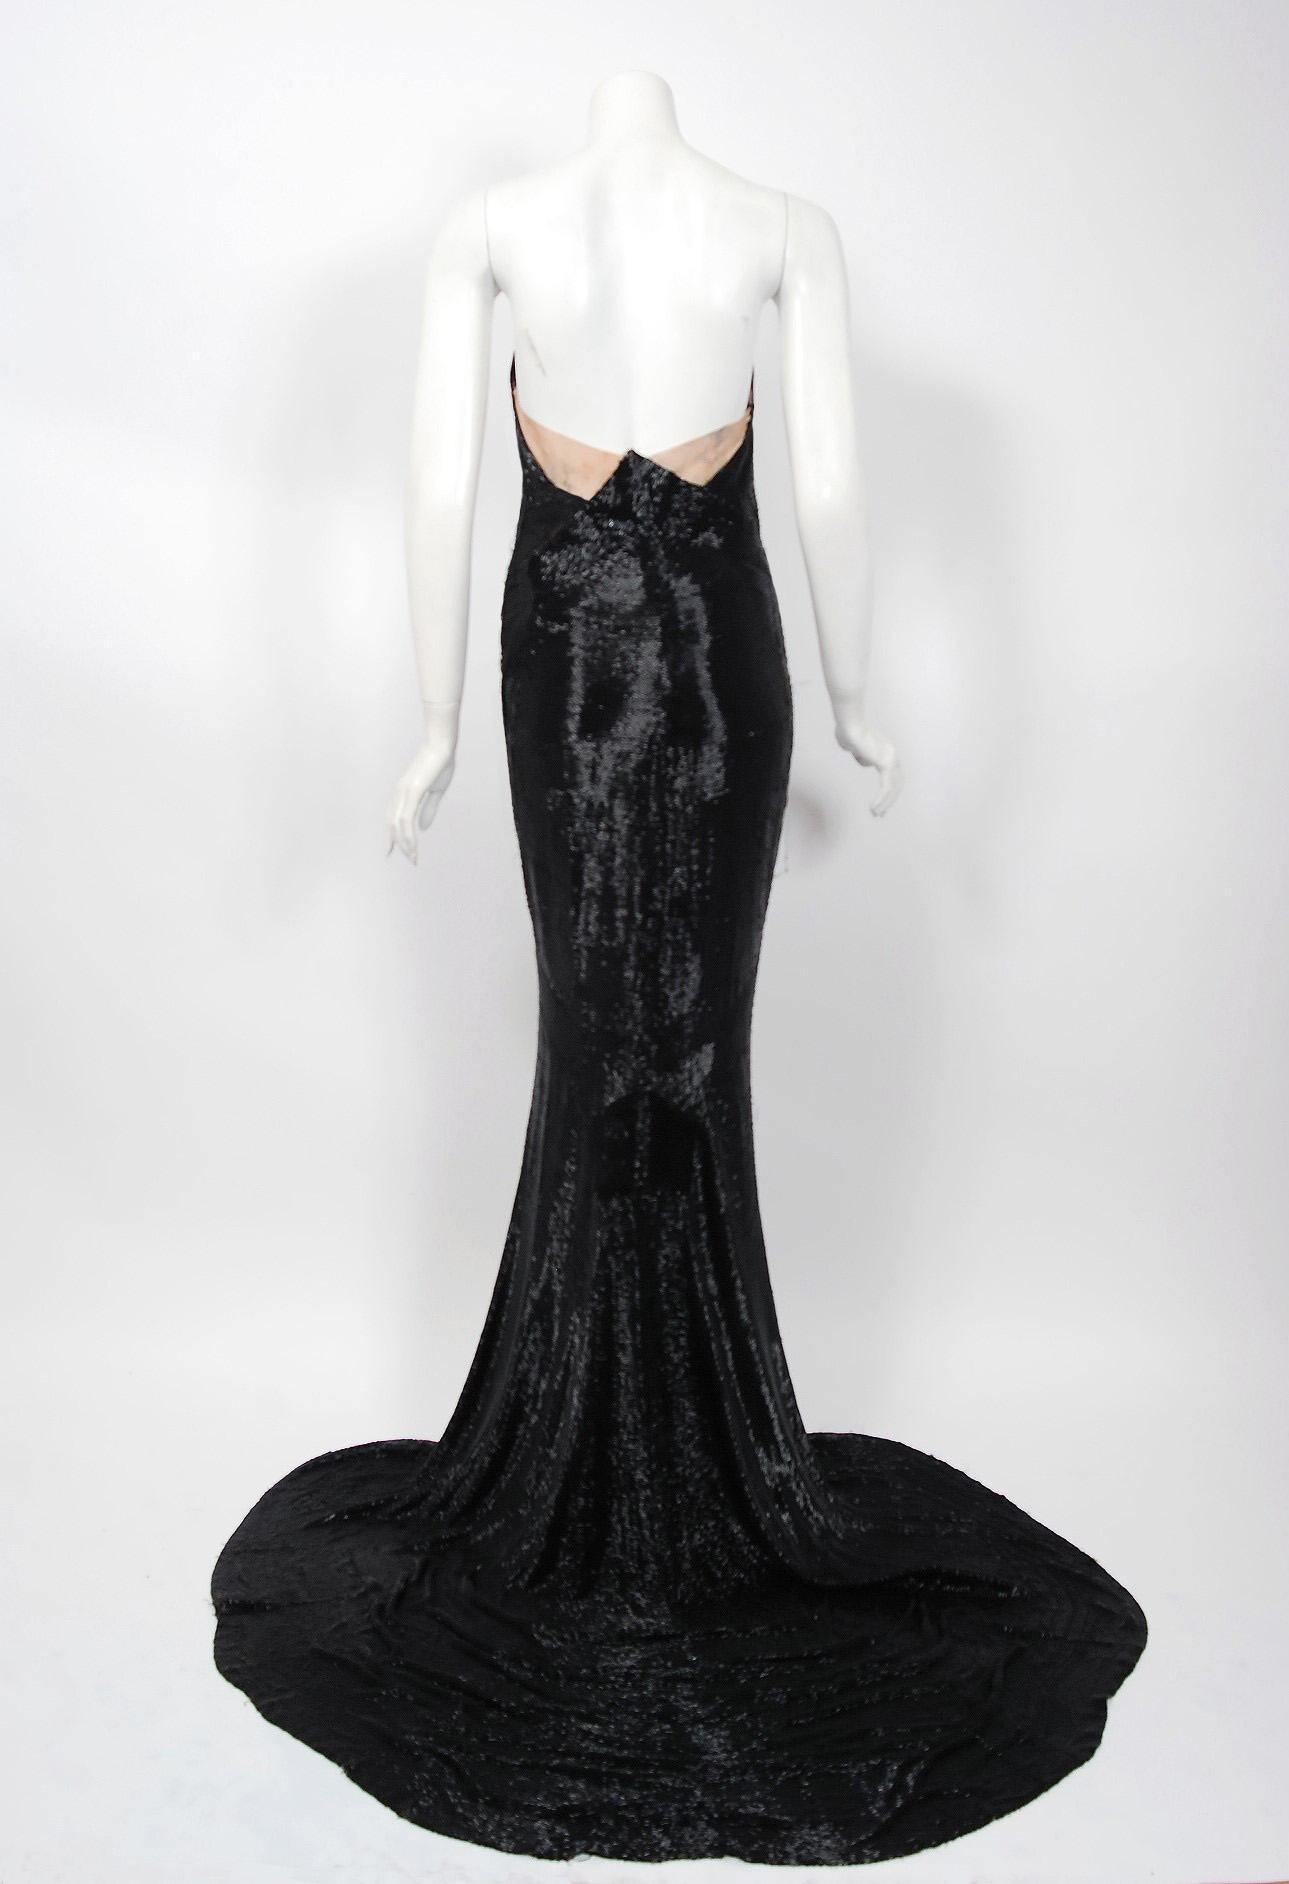 1943 Gilbert Adrian Couture Black Beaded Strapless Gown Worn By Lana Turner 3